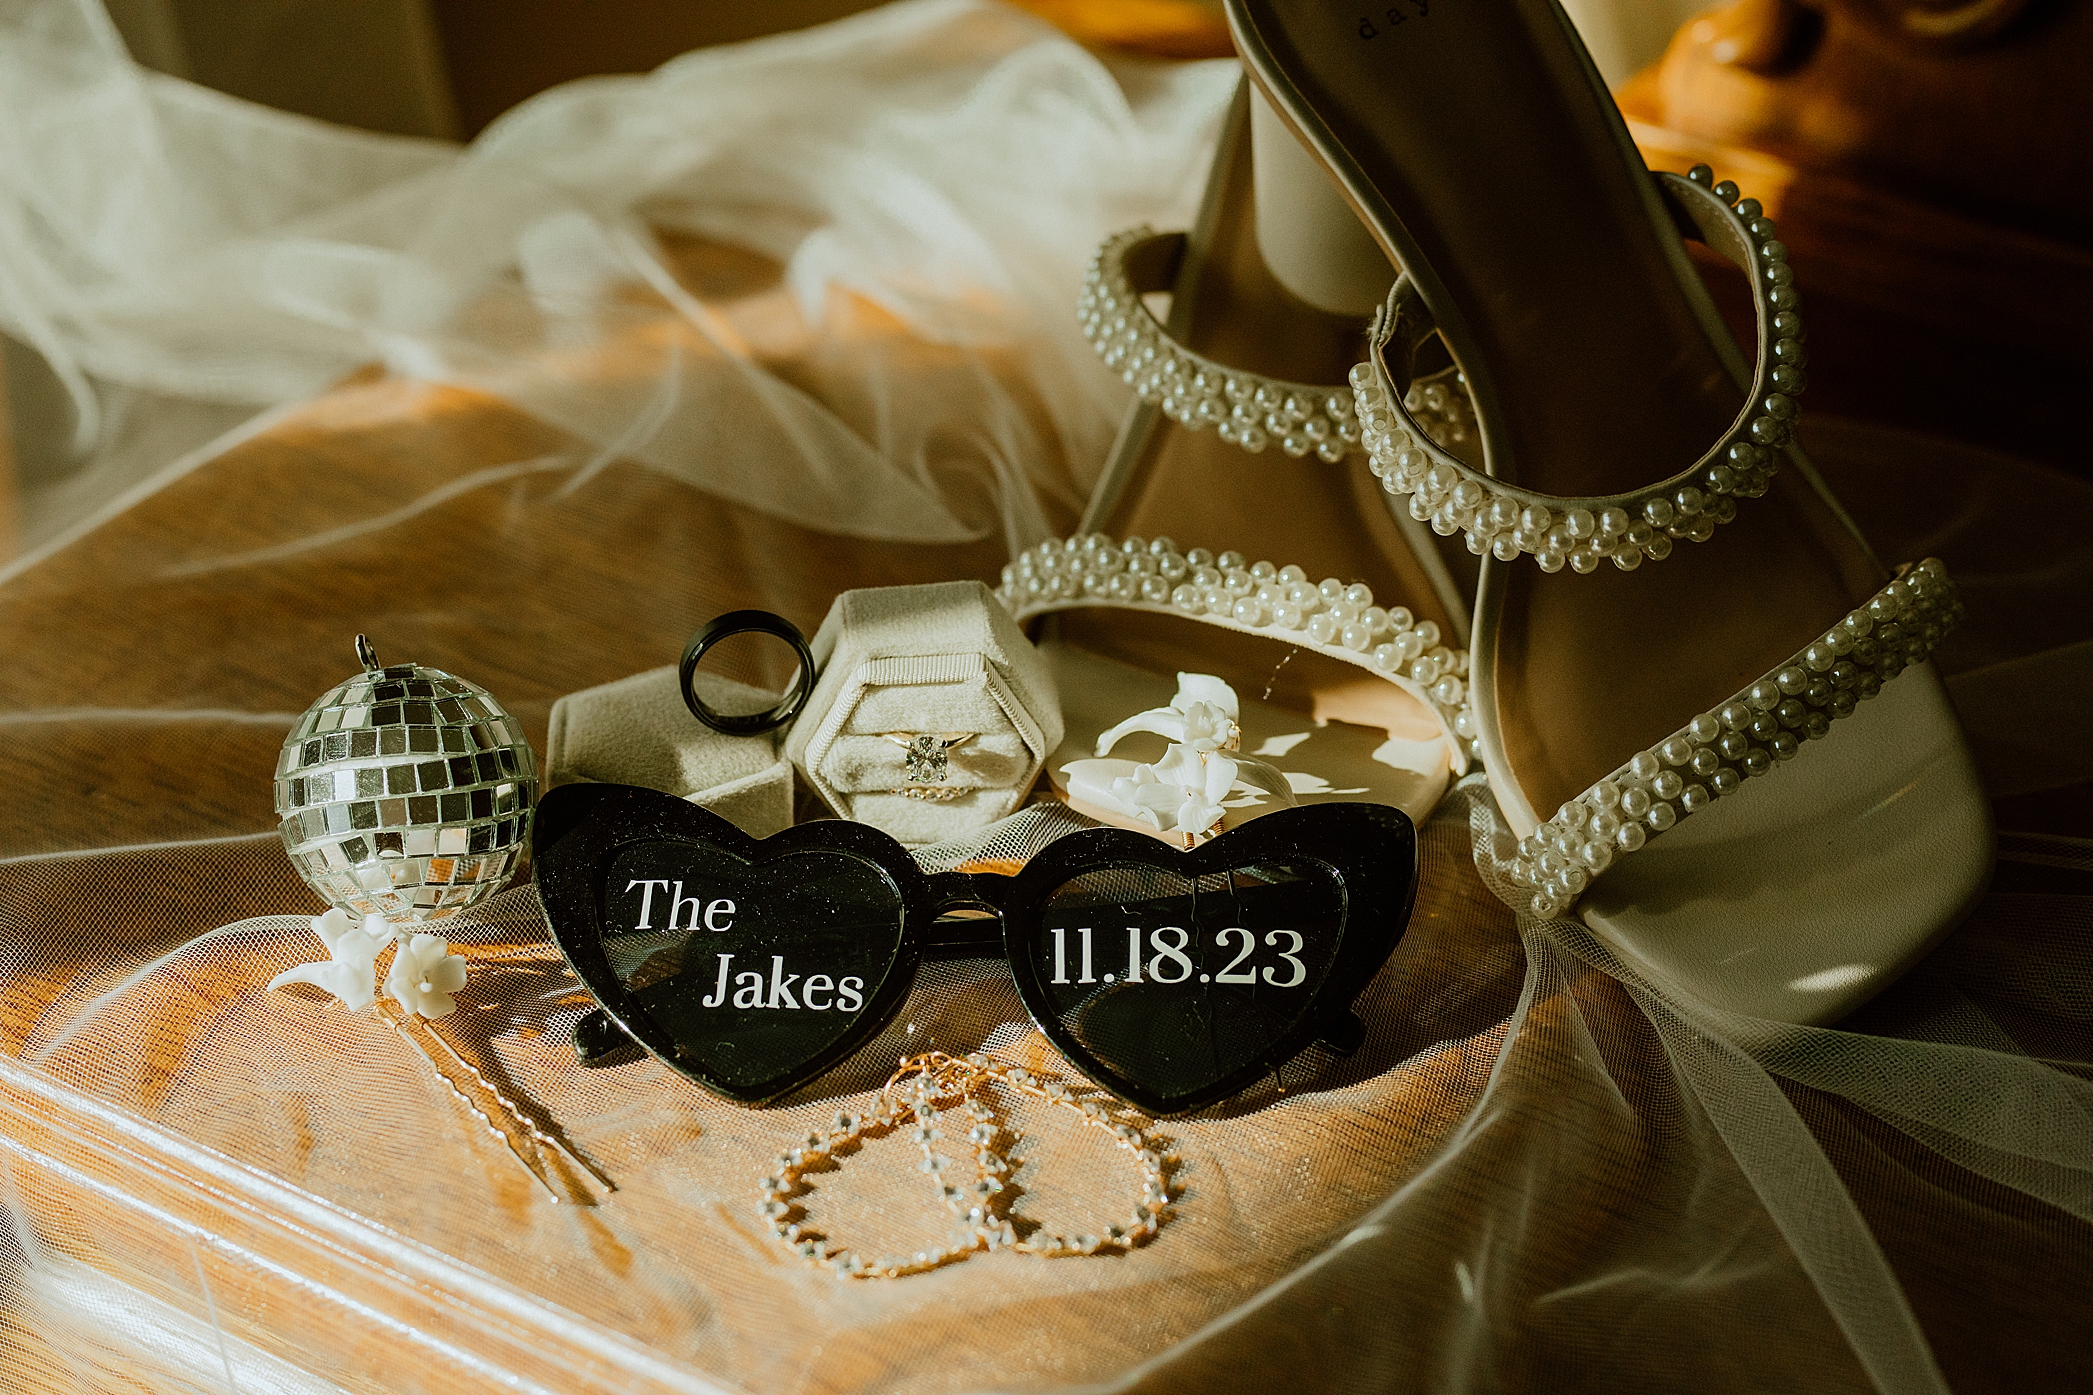 wedding photographer lays out wedding items from the special for a great memory in their wedding album: shoes, rings, date, veil